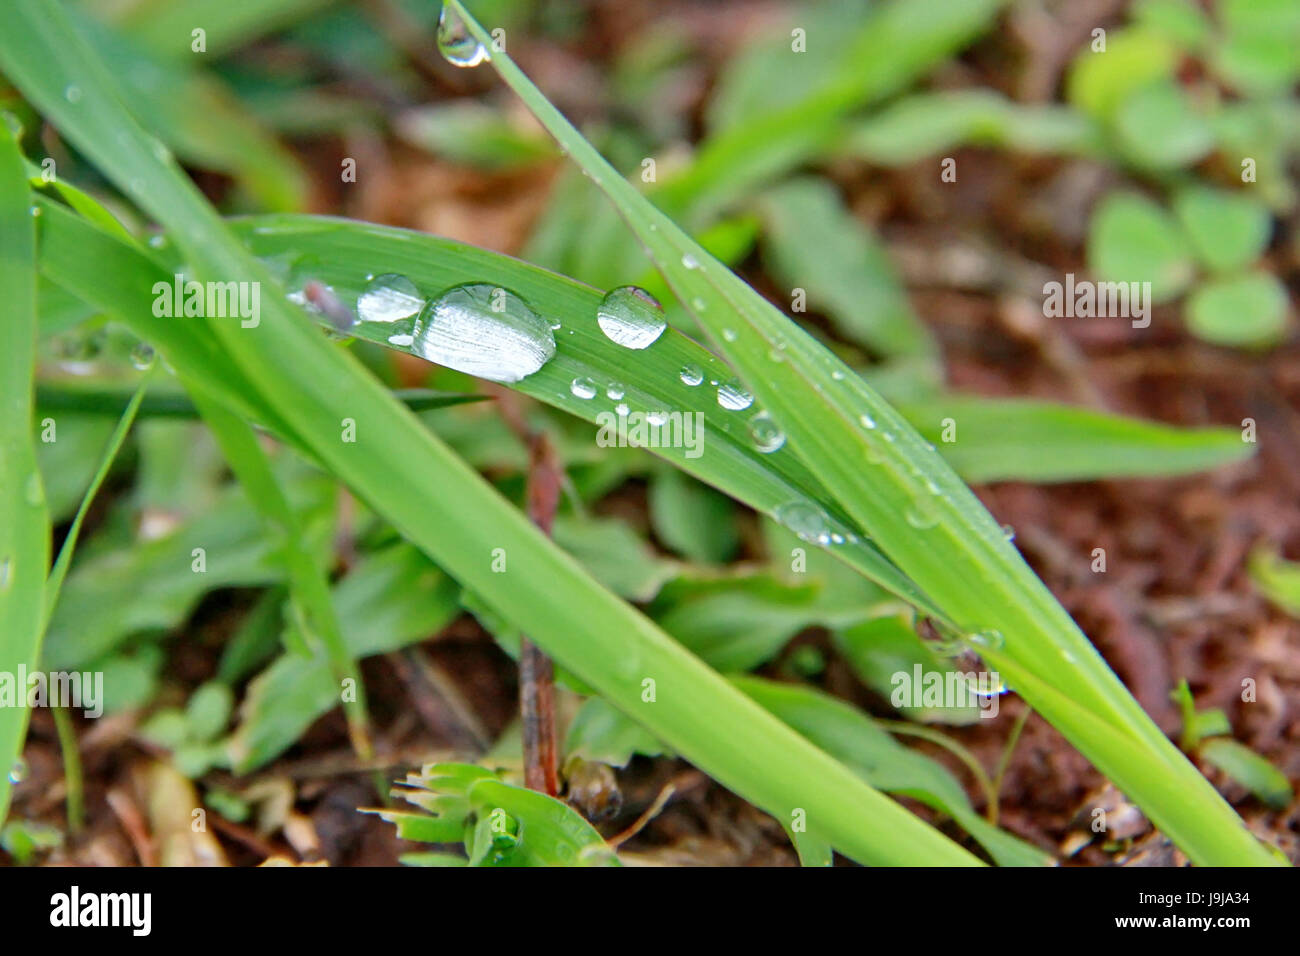 drop of water on green leaf in rainy day Stock Photo